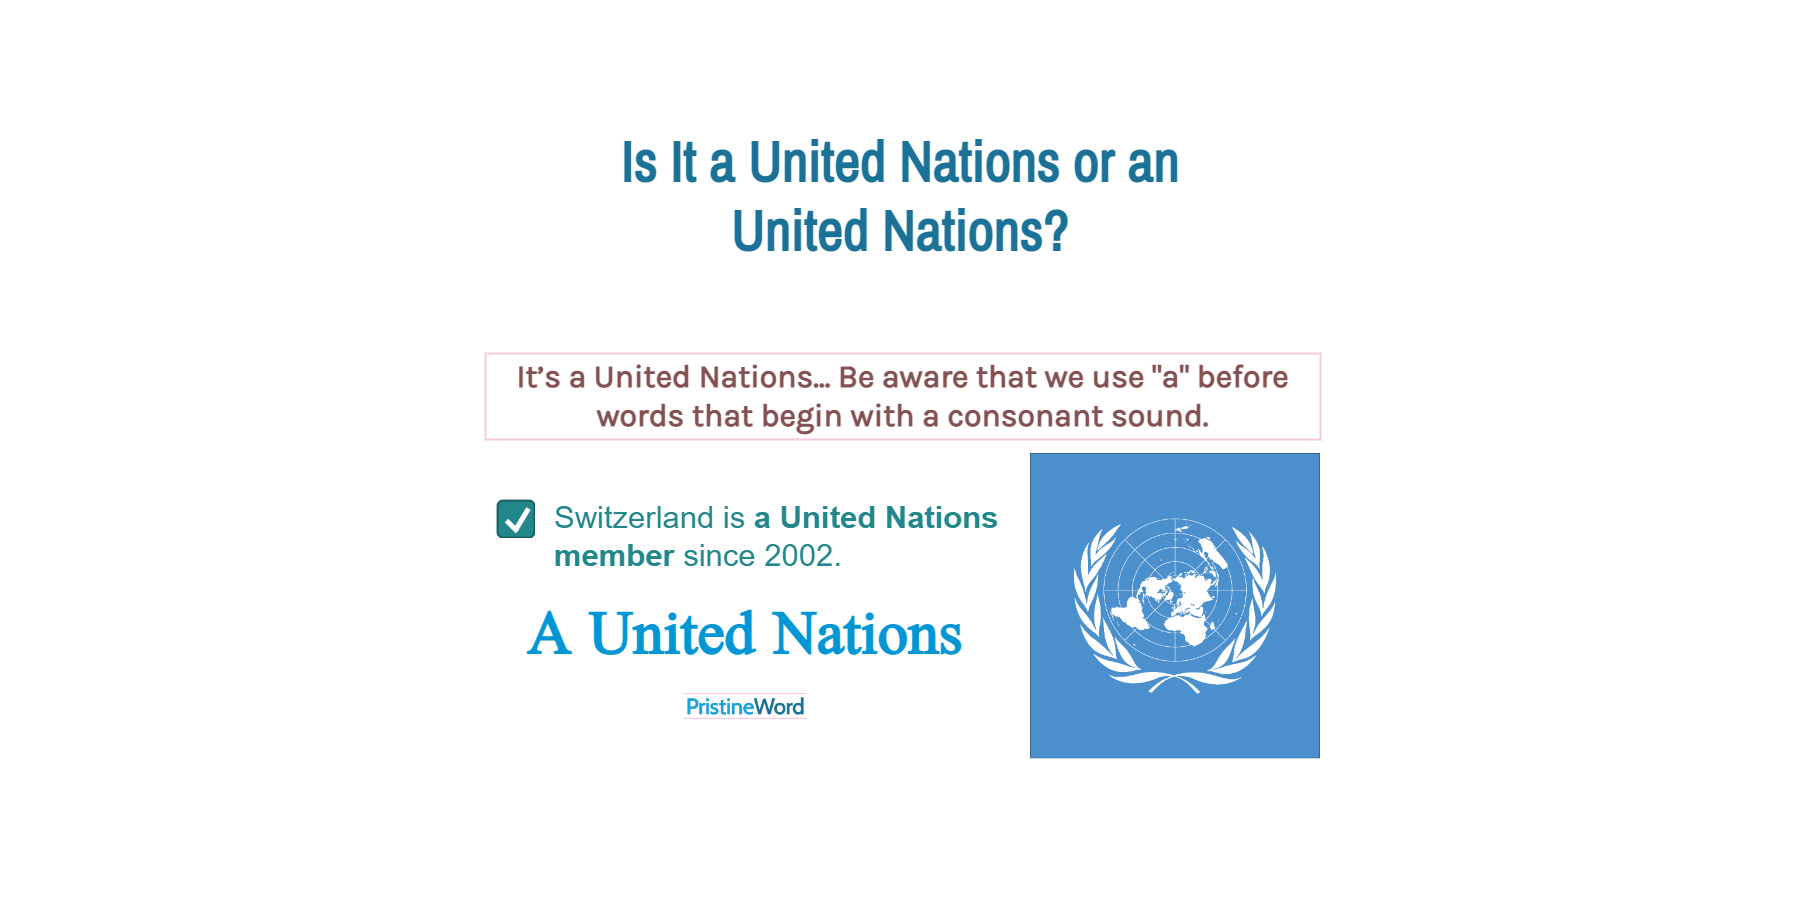 Is It a United Nations or an United Nations?